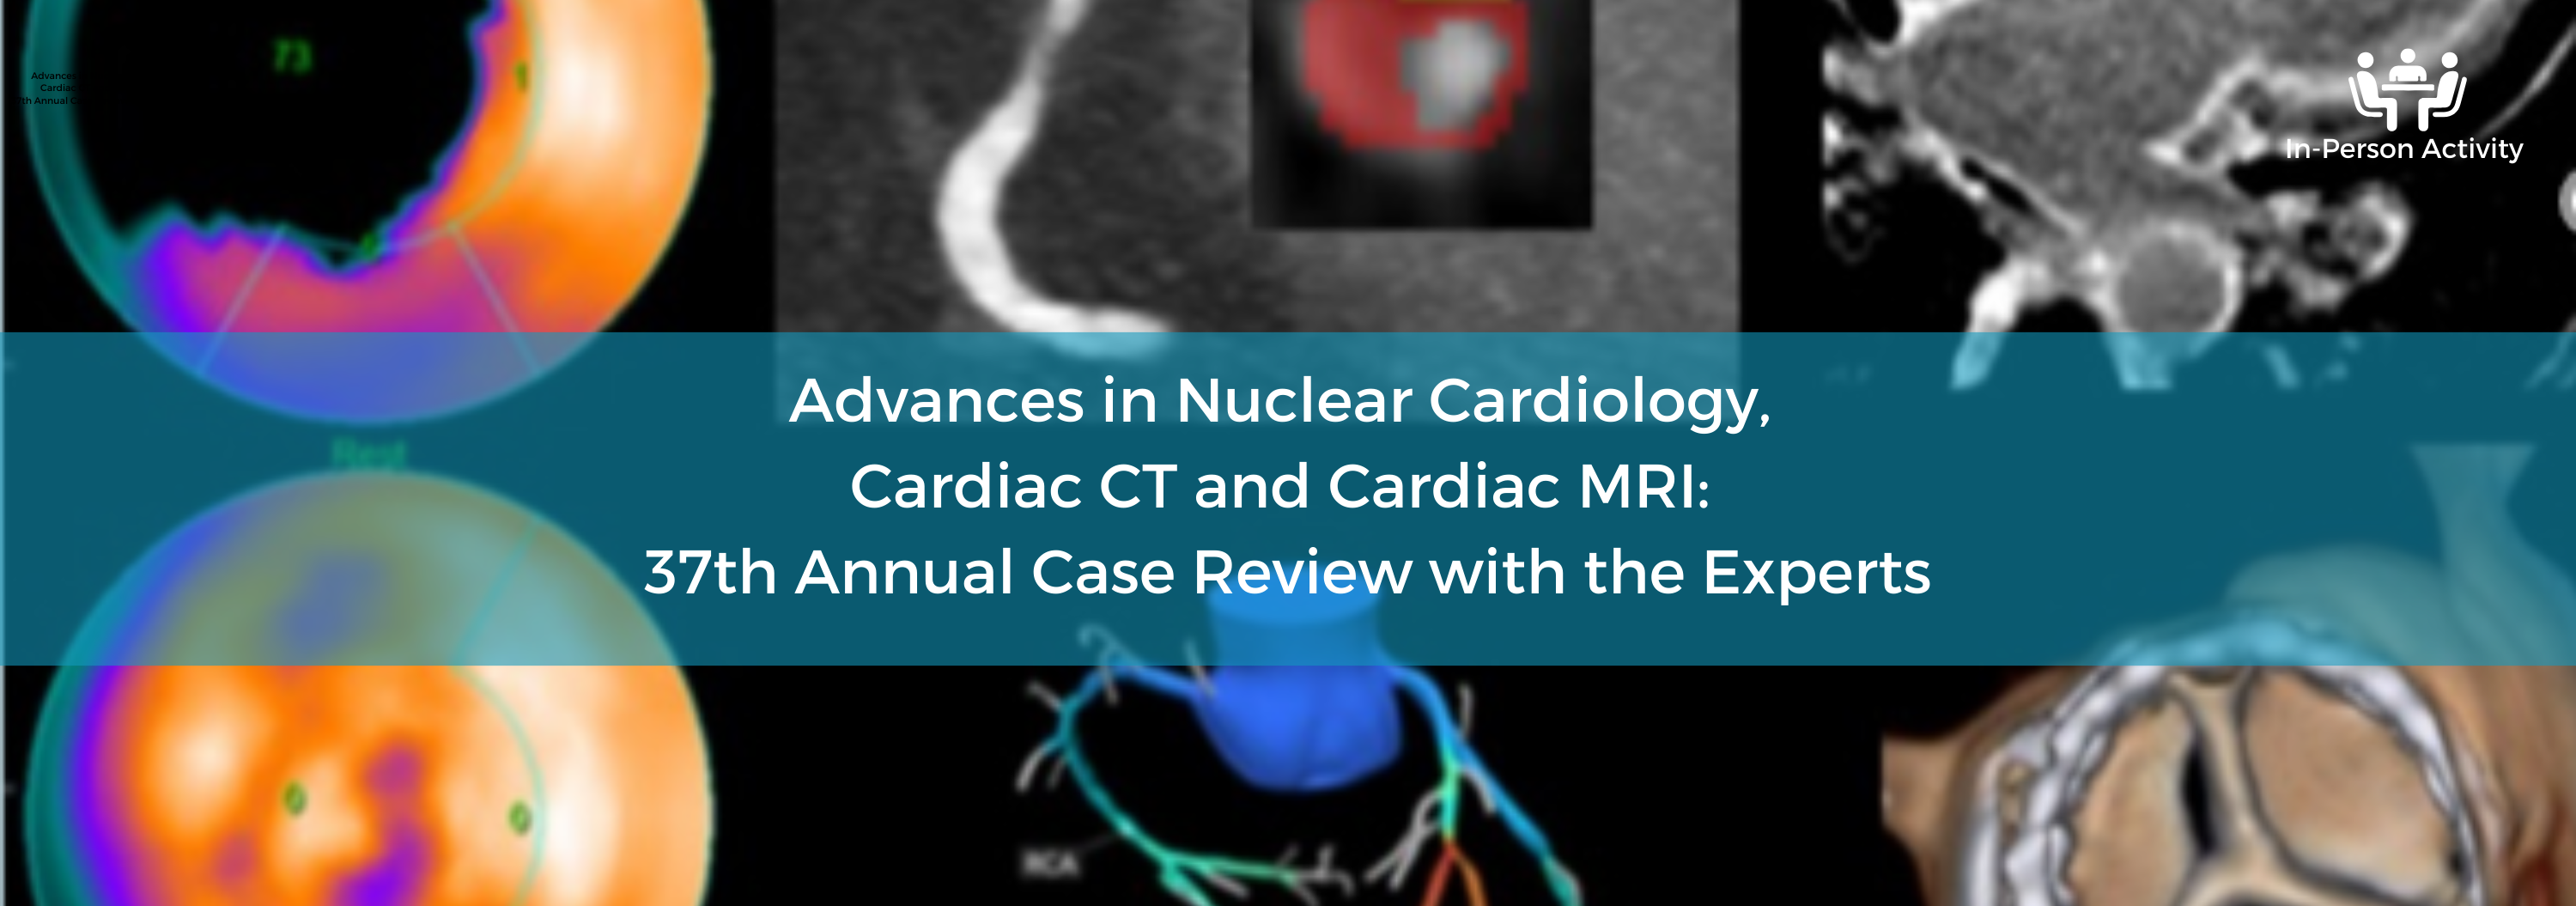 Advances in Nuclear Cardiology, Cardiac CT and Cardiac MRI: 37th Annual Case Review with the Experts Banner